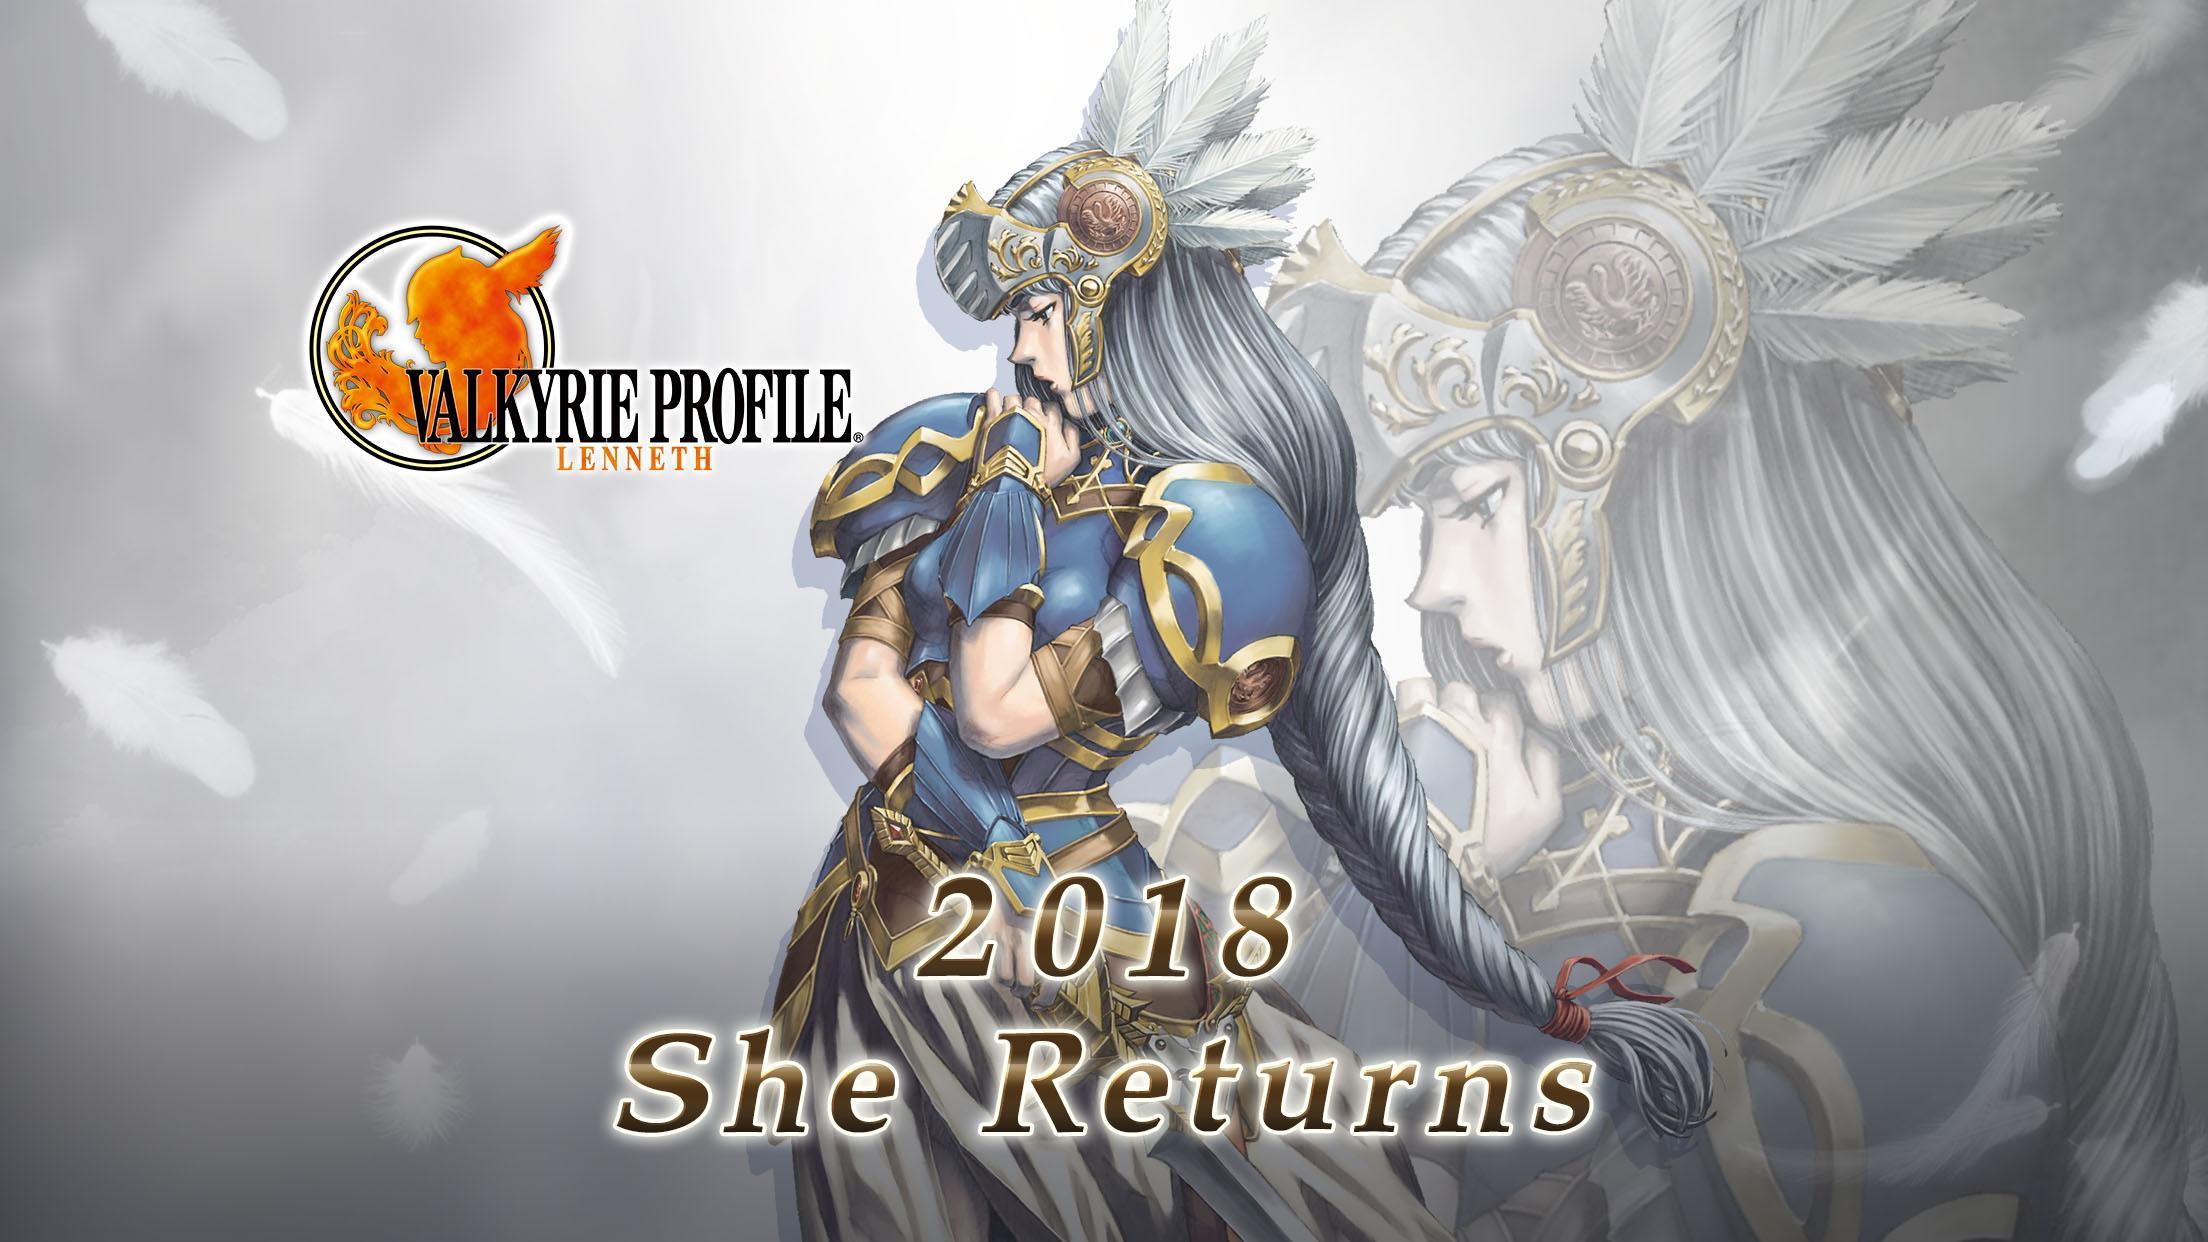 Screenshot 1 of VALKYRIE PROFILE: LENNETH 